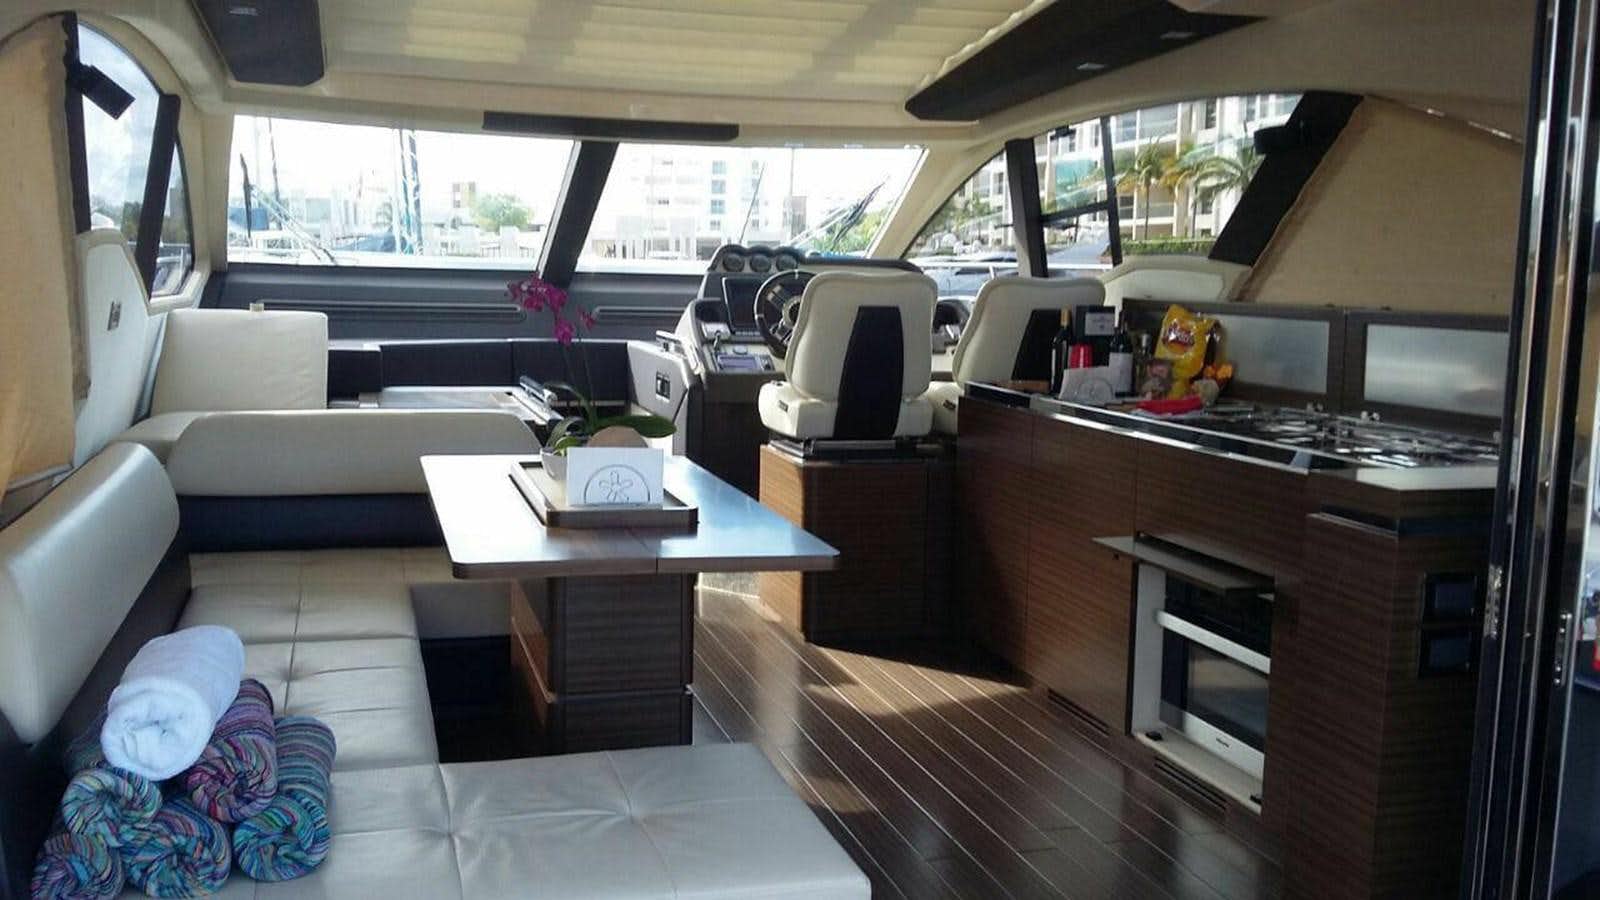 Ey iv
Yacht for Sale